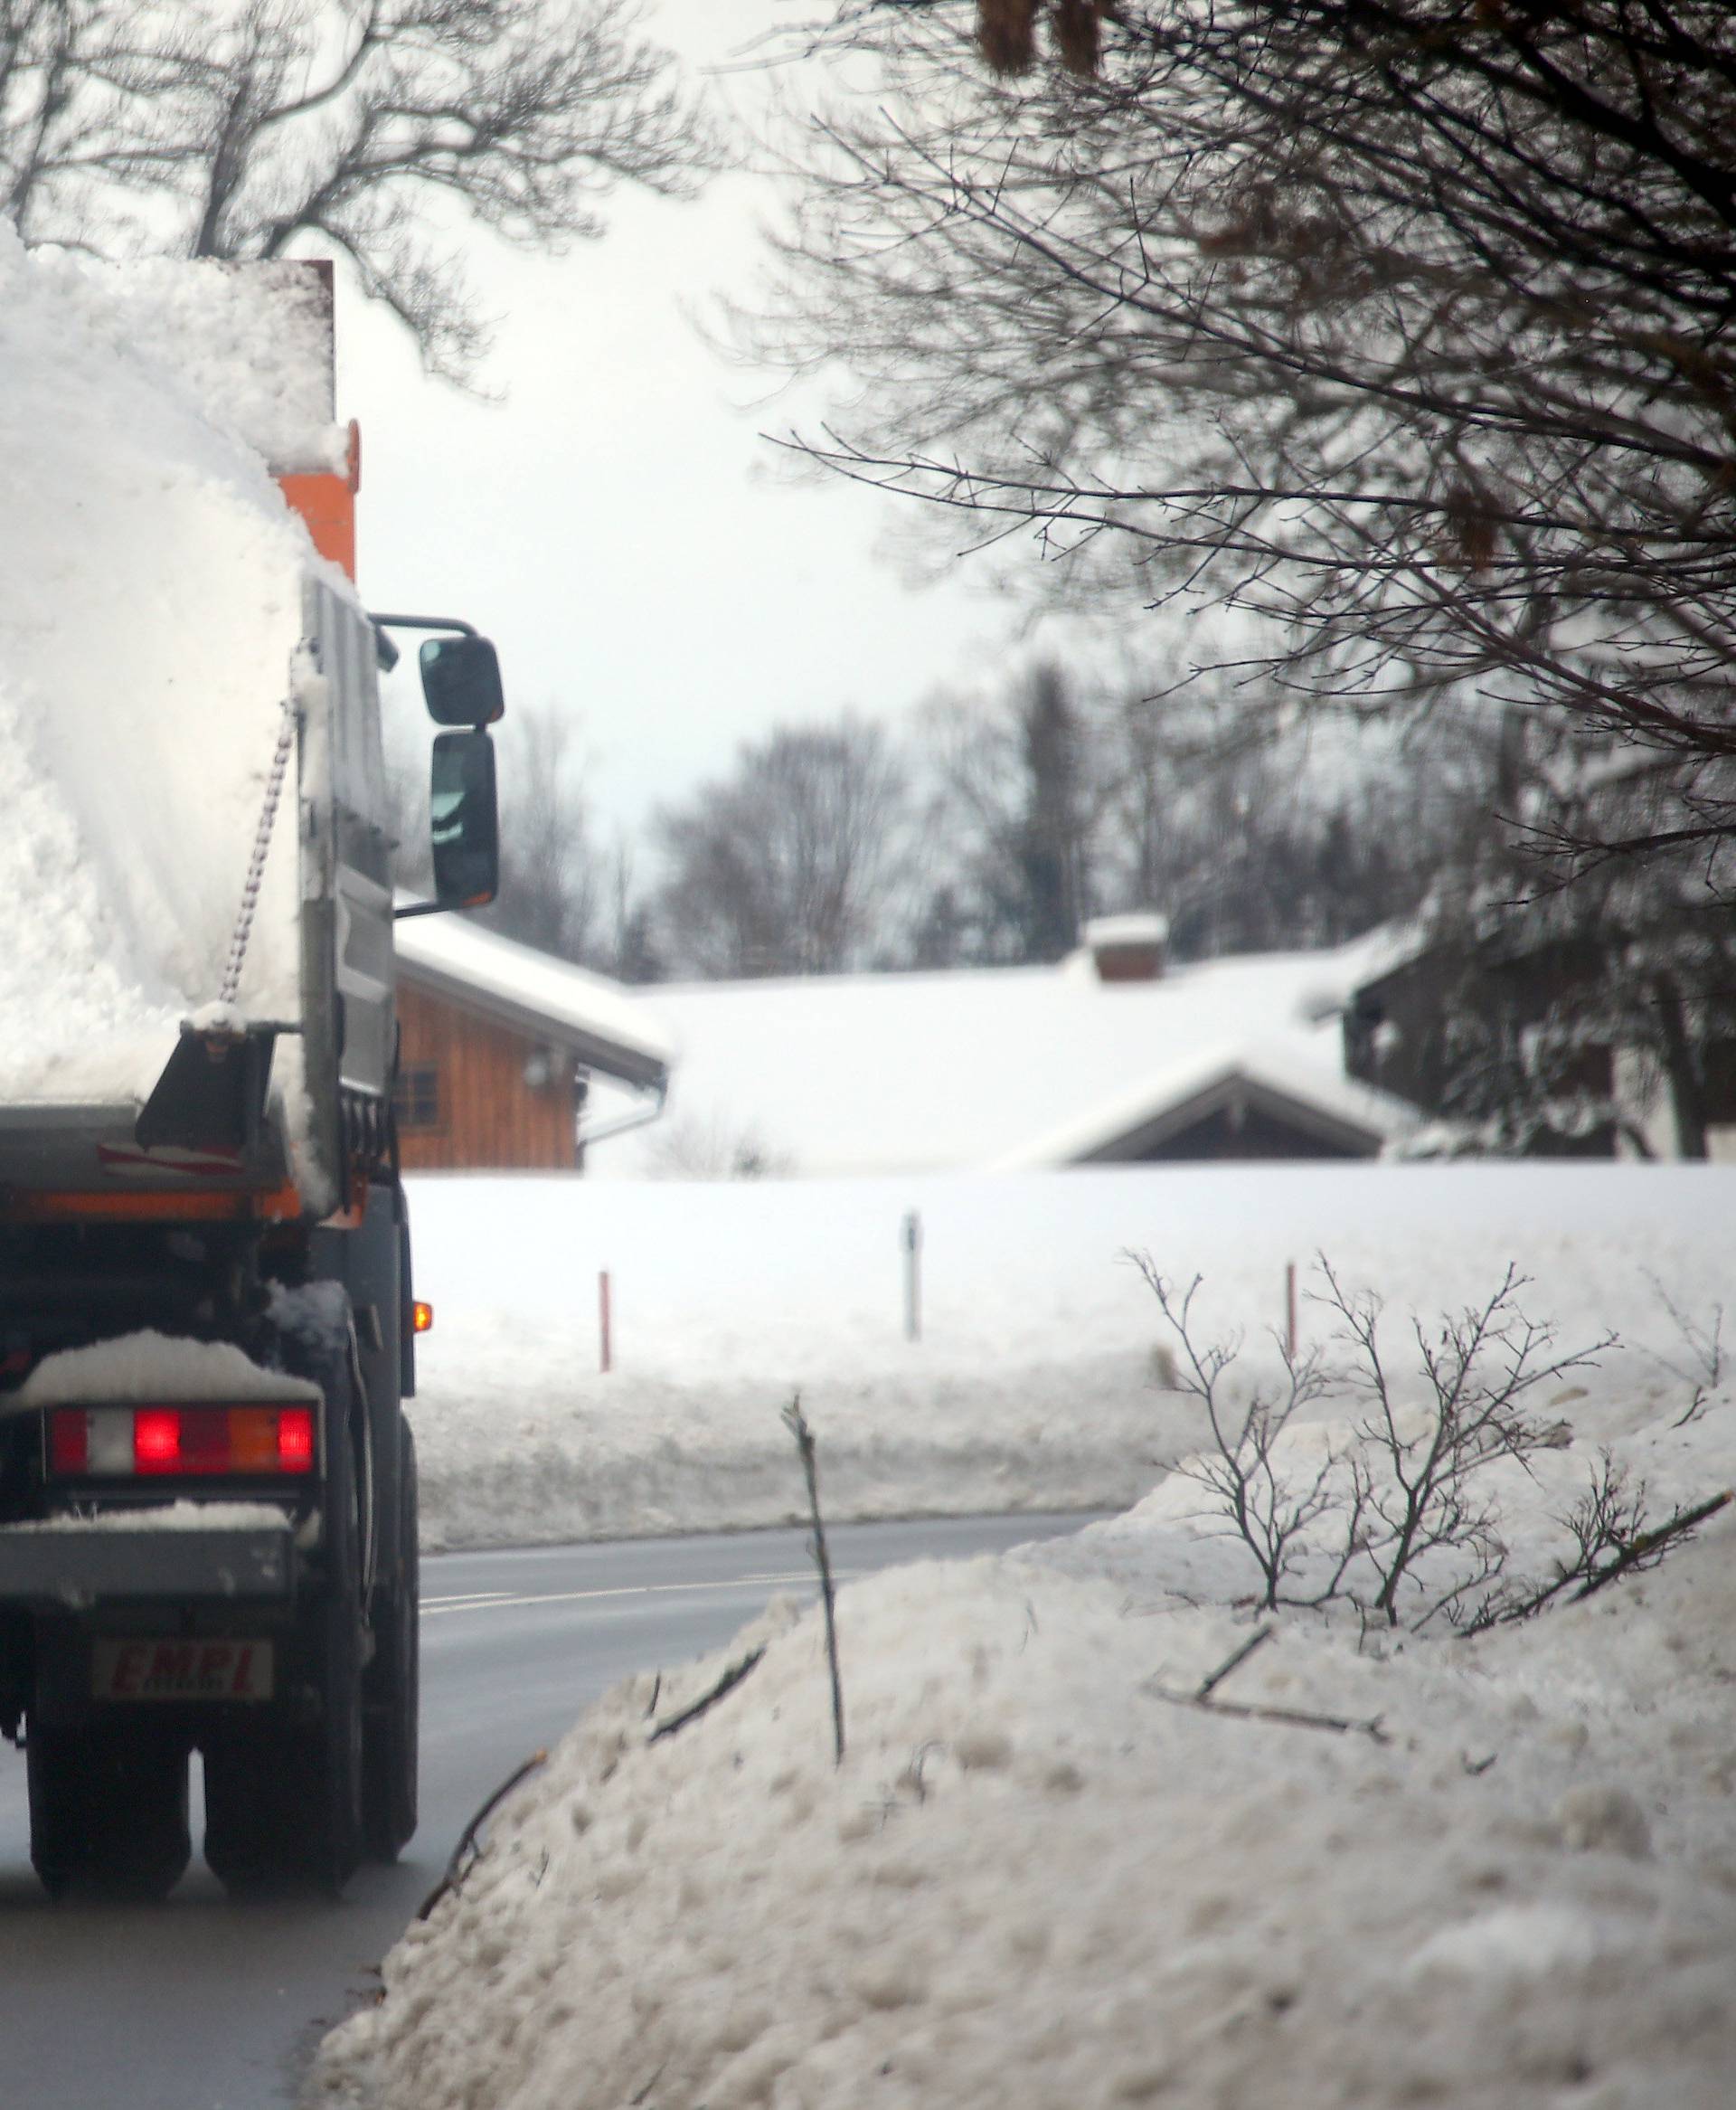 A truck carries snow near Miesbach, southern Germany